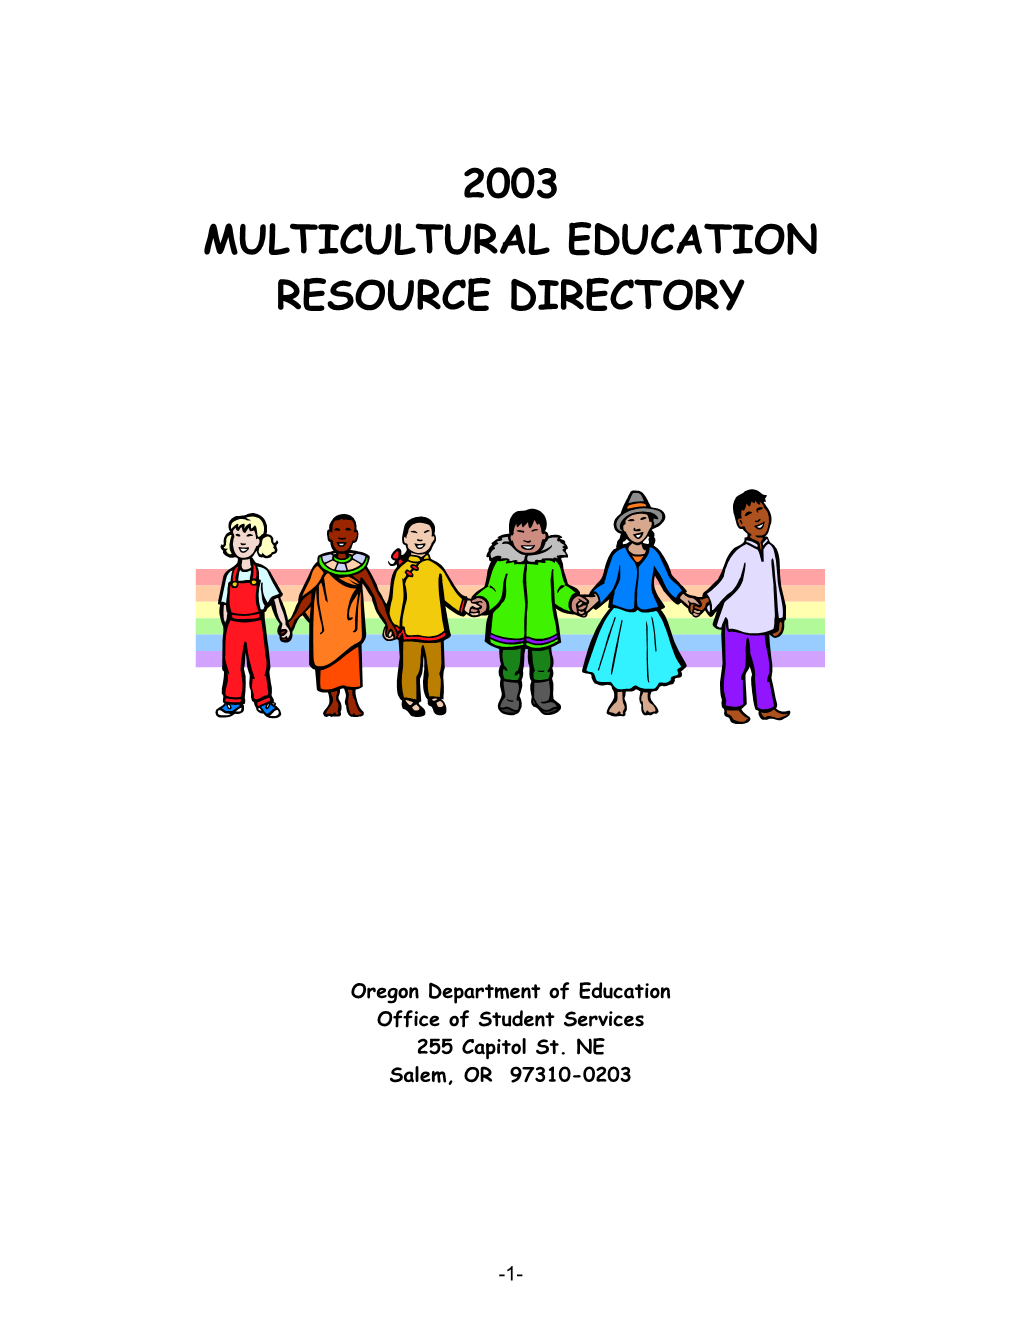 Multicultural Educational Resources Directory